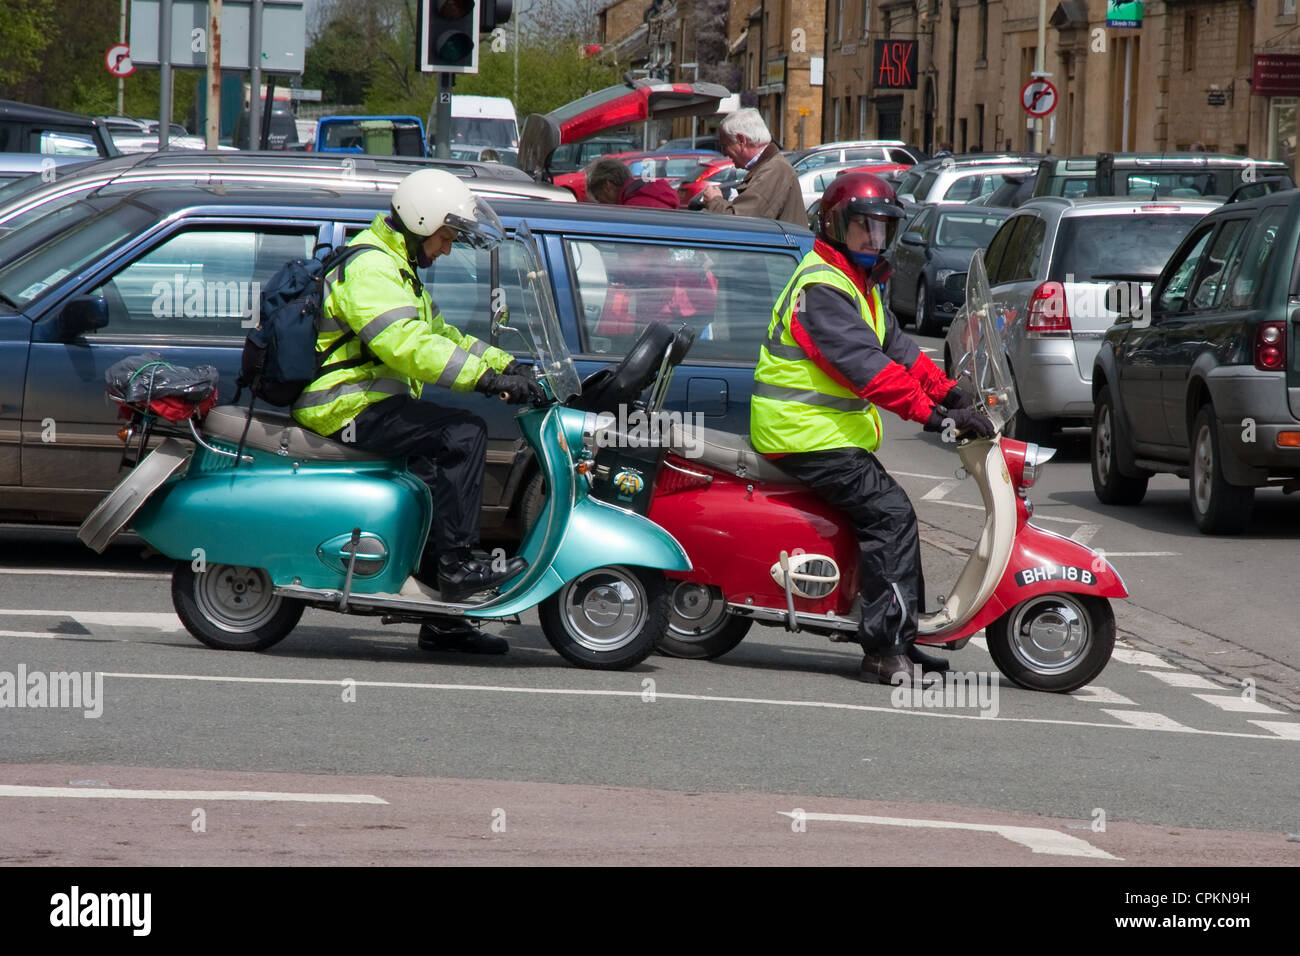 1960's BSA Sunbeam Scooters at road junction Stock Photo - Alamy